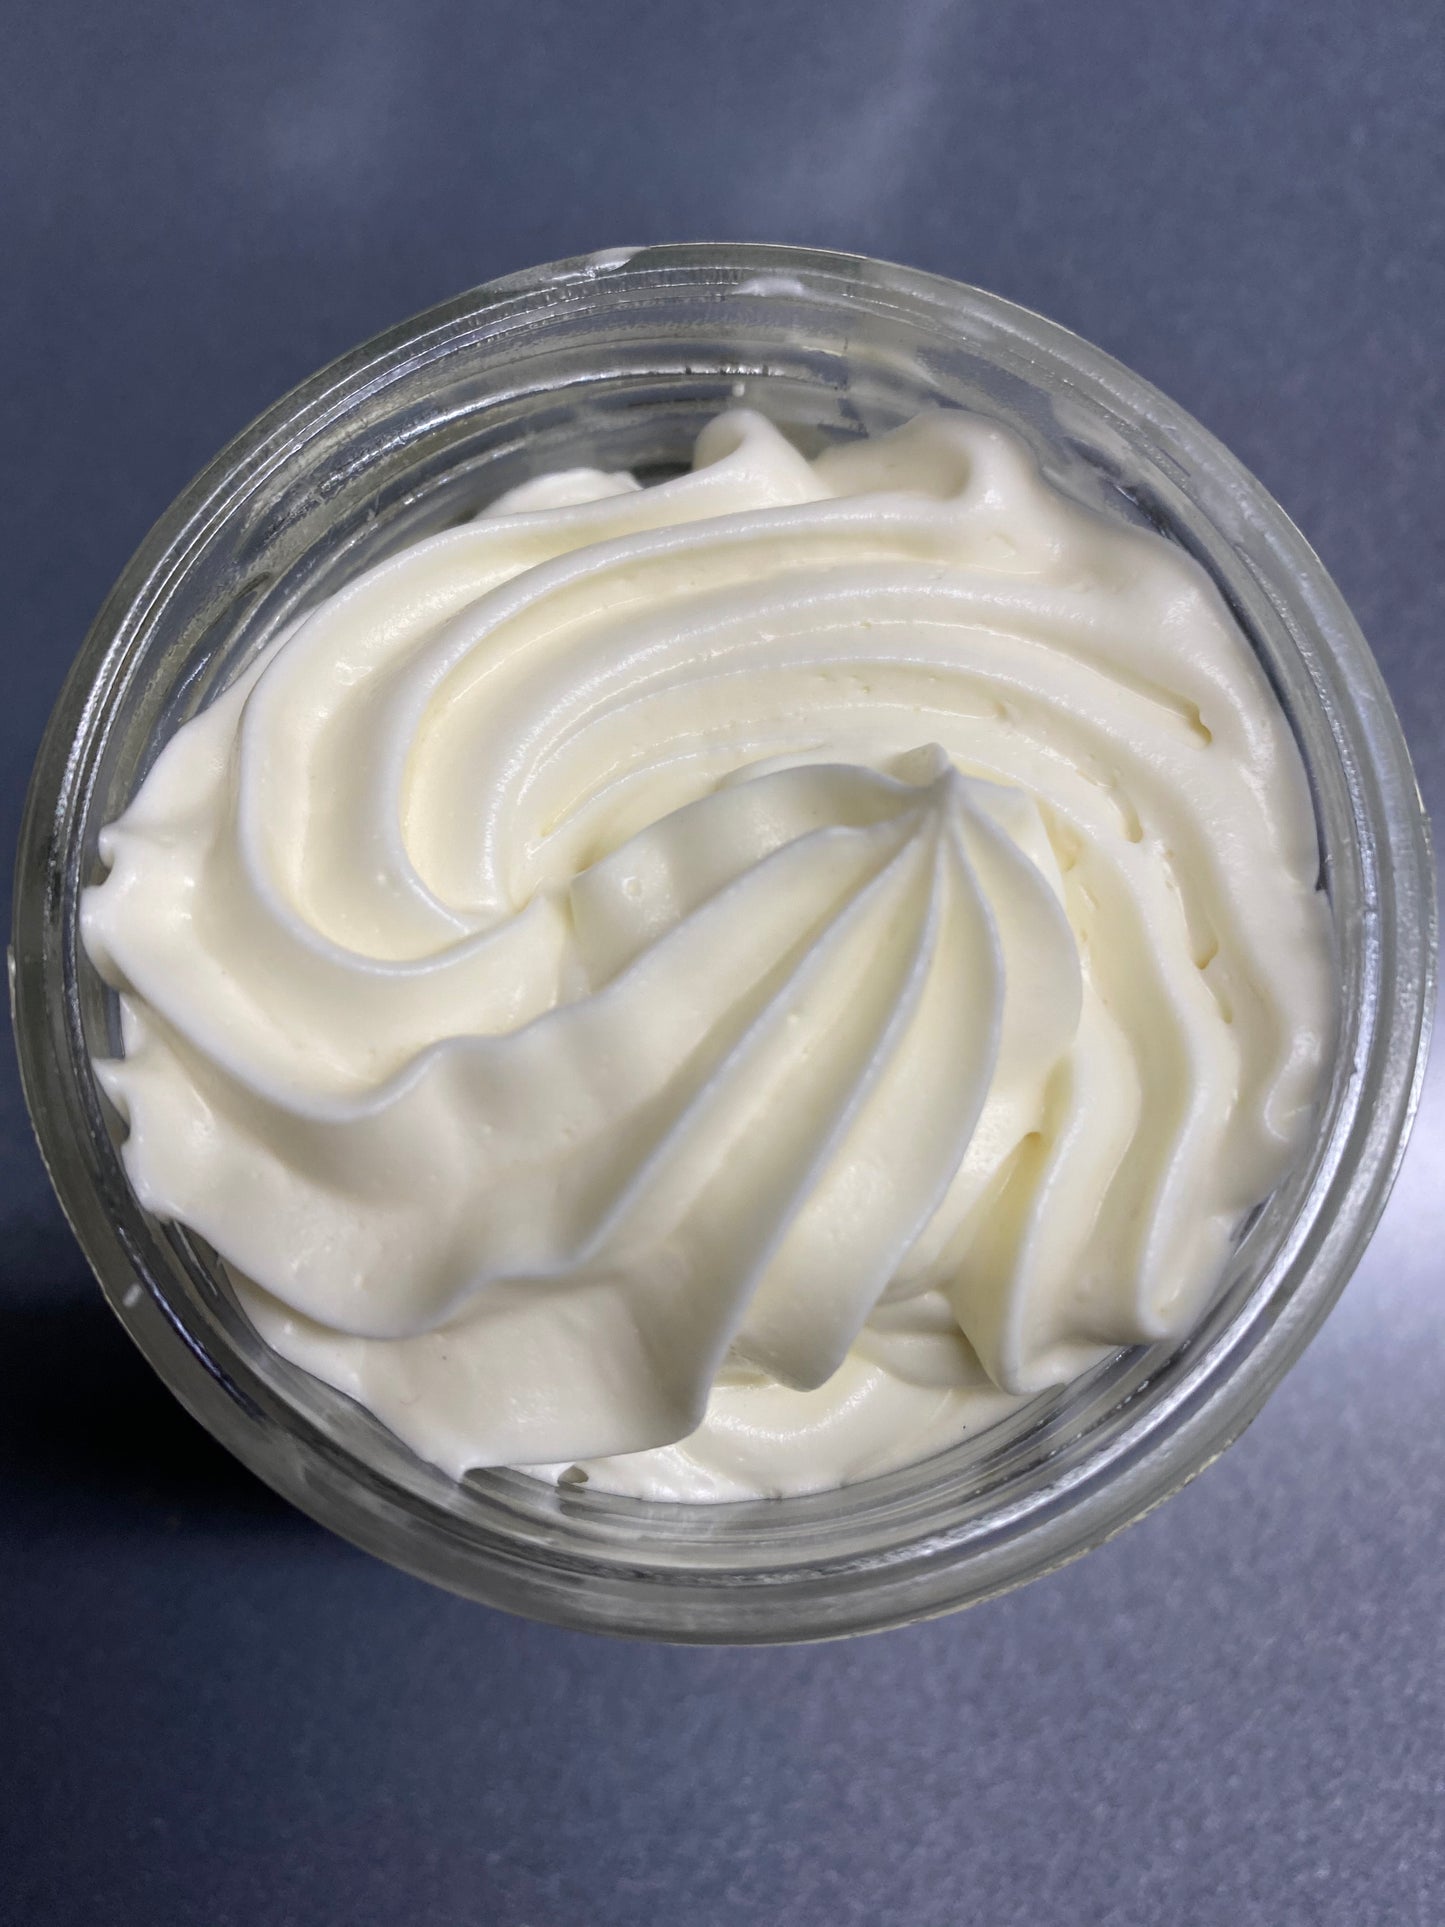 use body butter on their lips, hands, elbows, legs and feet. Some absorb into the skin quickly while others may leave a slightly oily barrier.